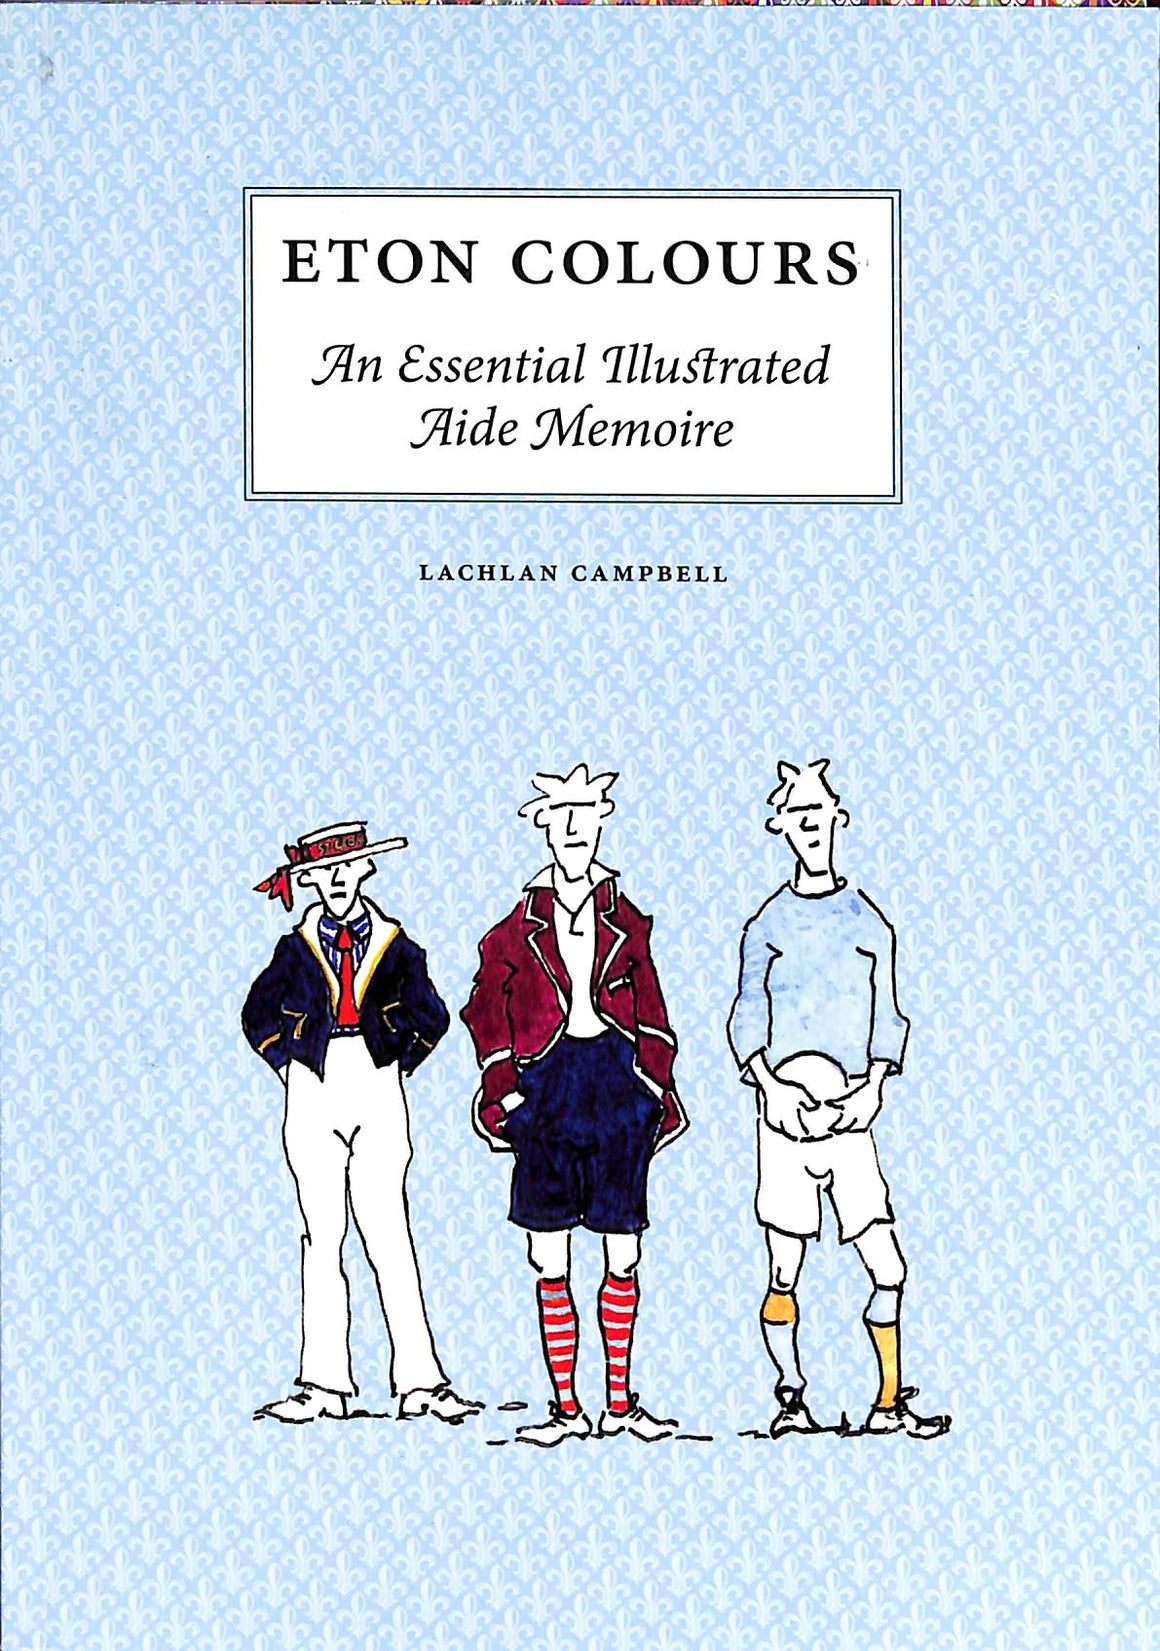 "Eton Colours: An Essential Illustrated Aide Memoire" 2008 CAMPBELL, Lachlan